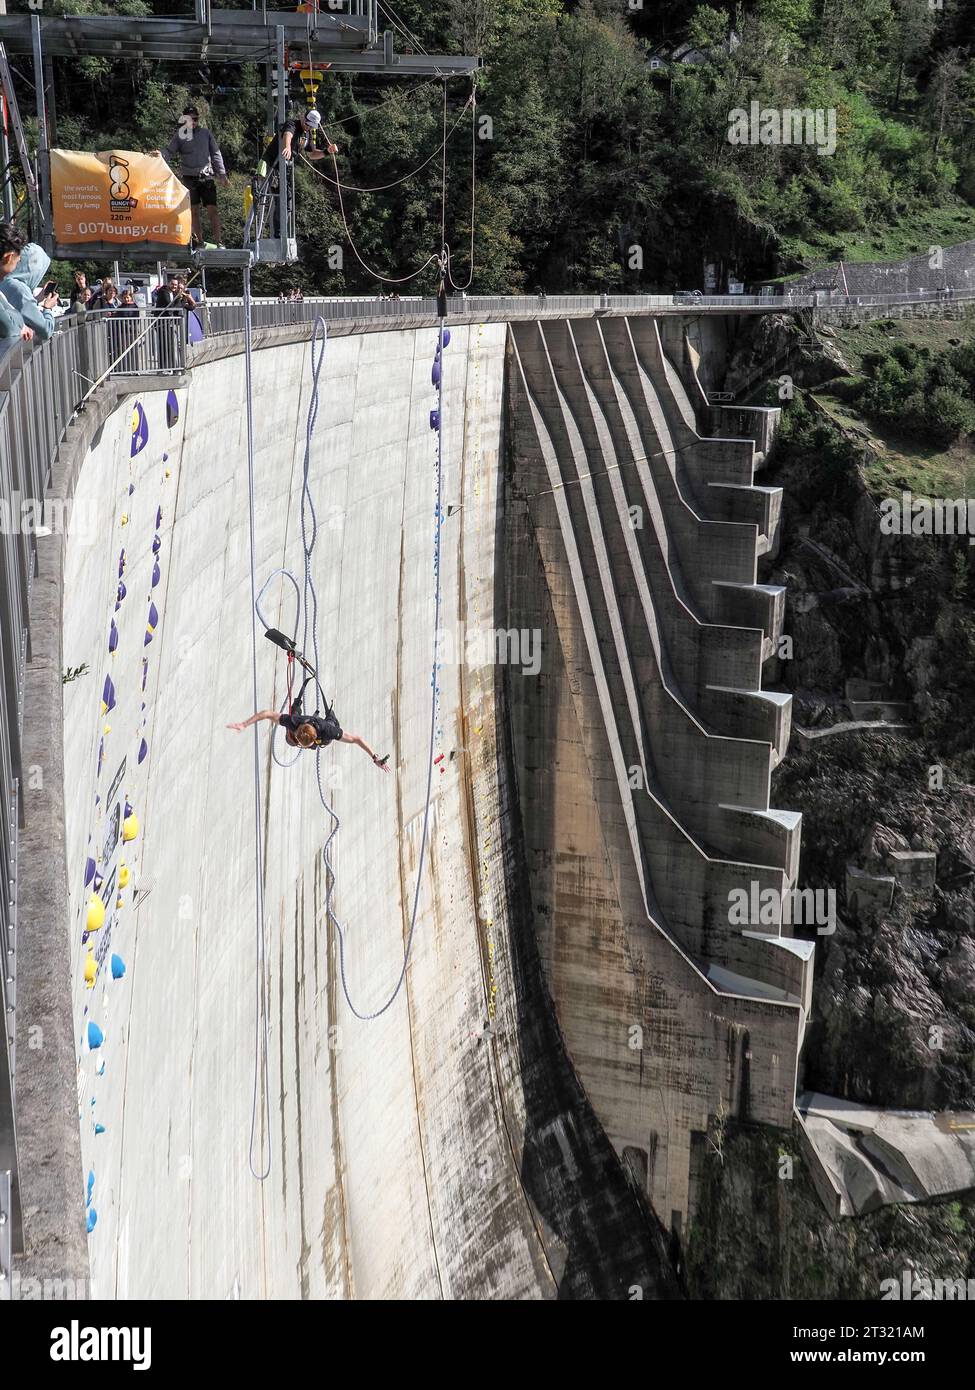 Contra Dam, Switzerland - October 22, 2023: Bunging jumping from the dam, 'The sign shows the name of the proposed activity' Stock Photo